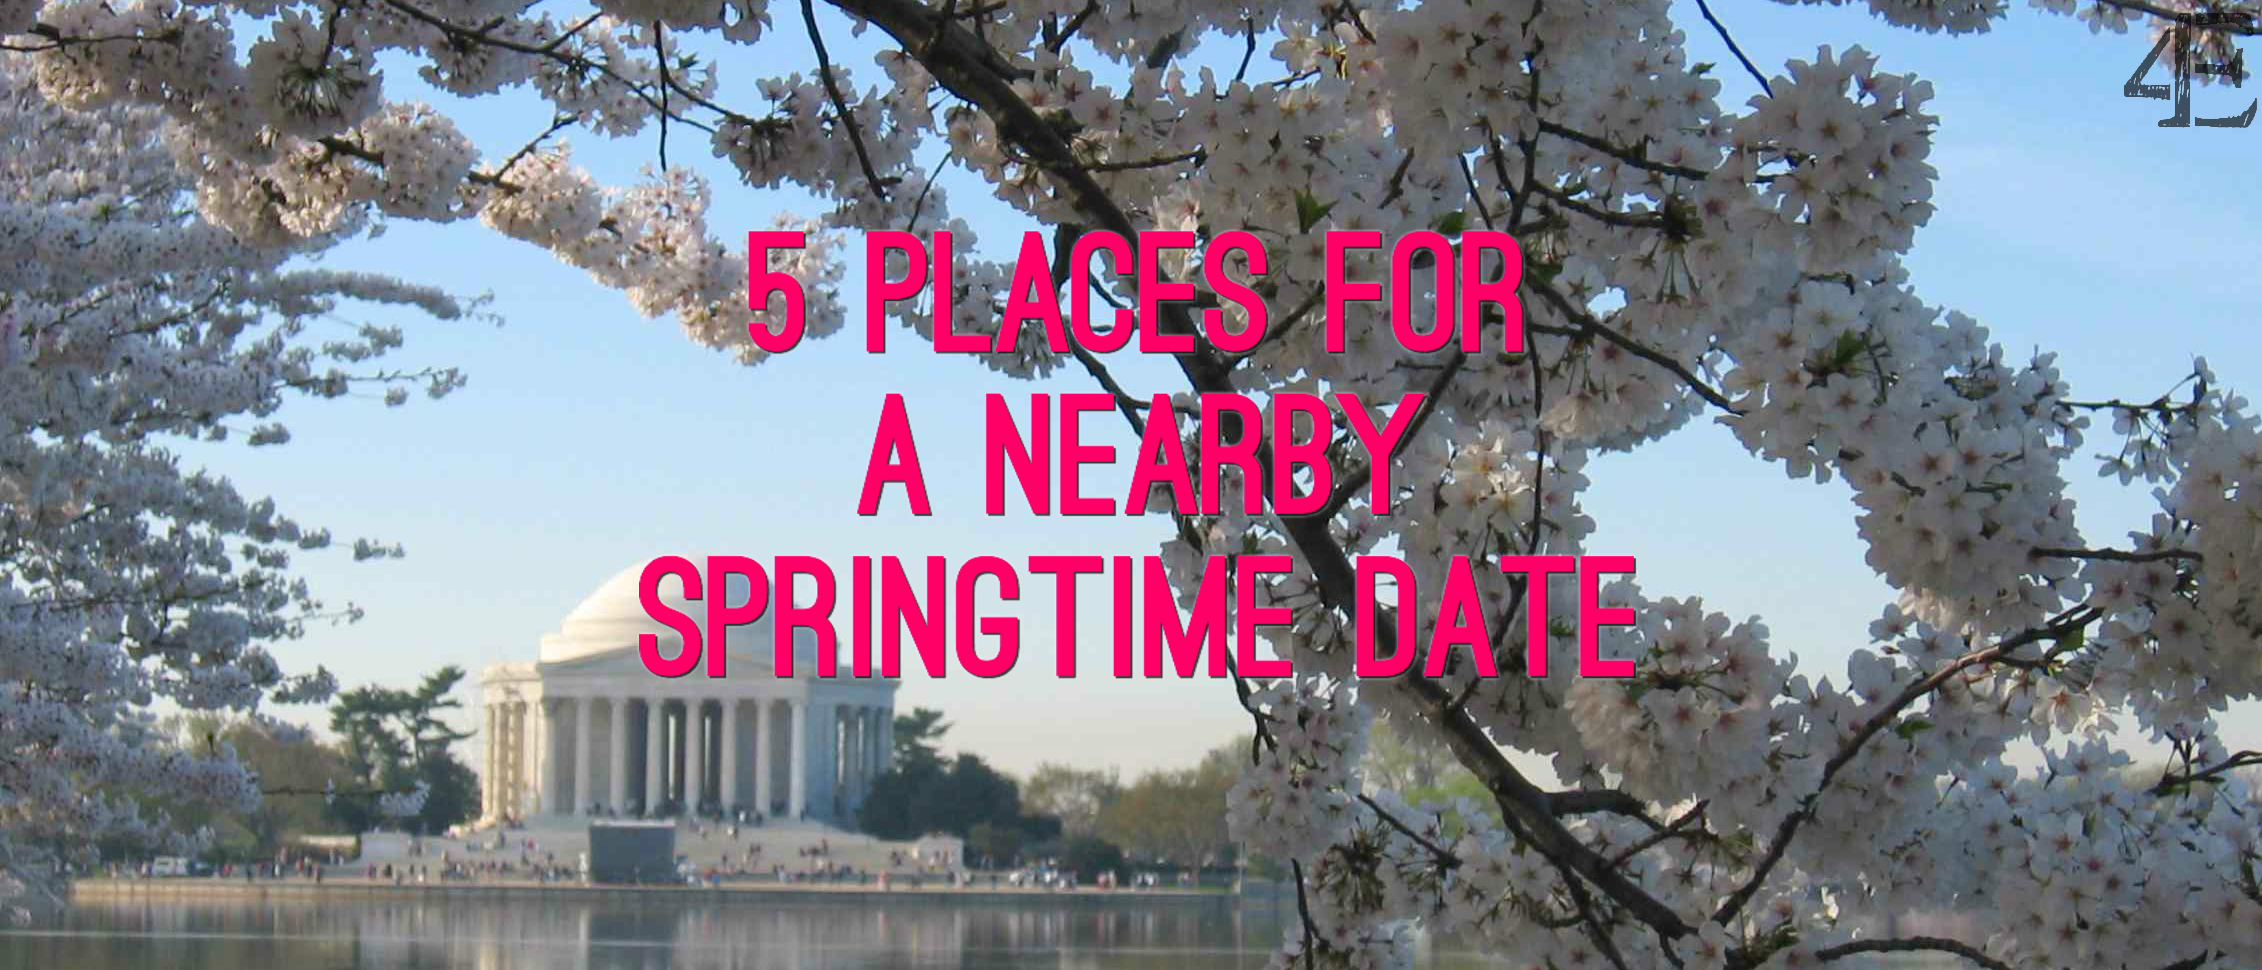 jefferson-memorial-at-cherry-blossom-time